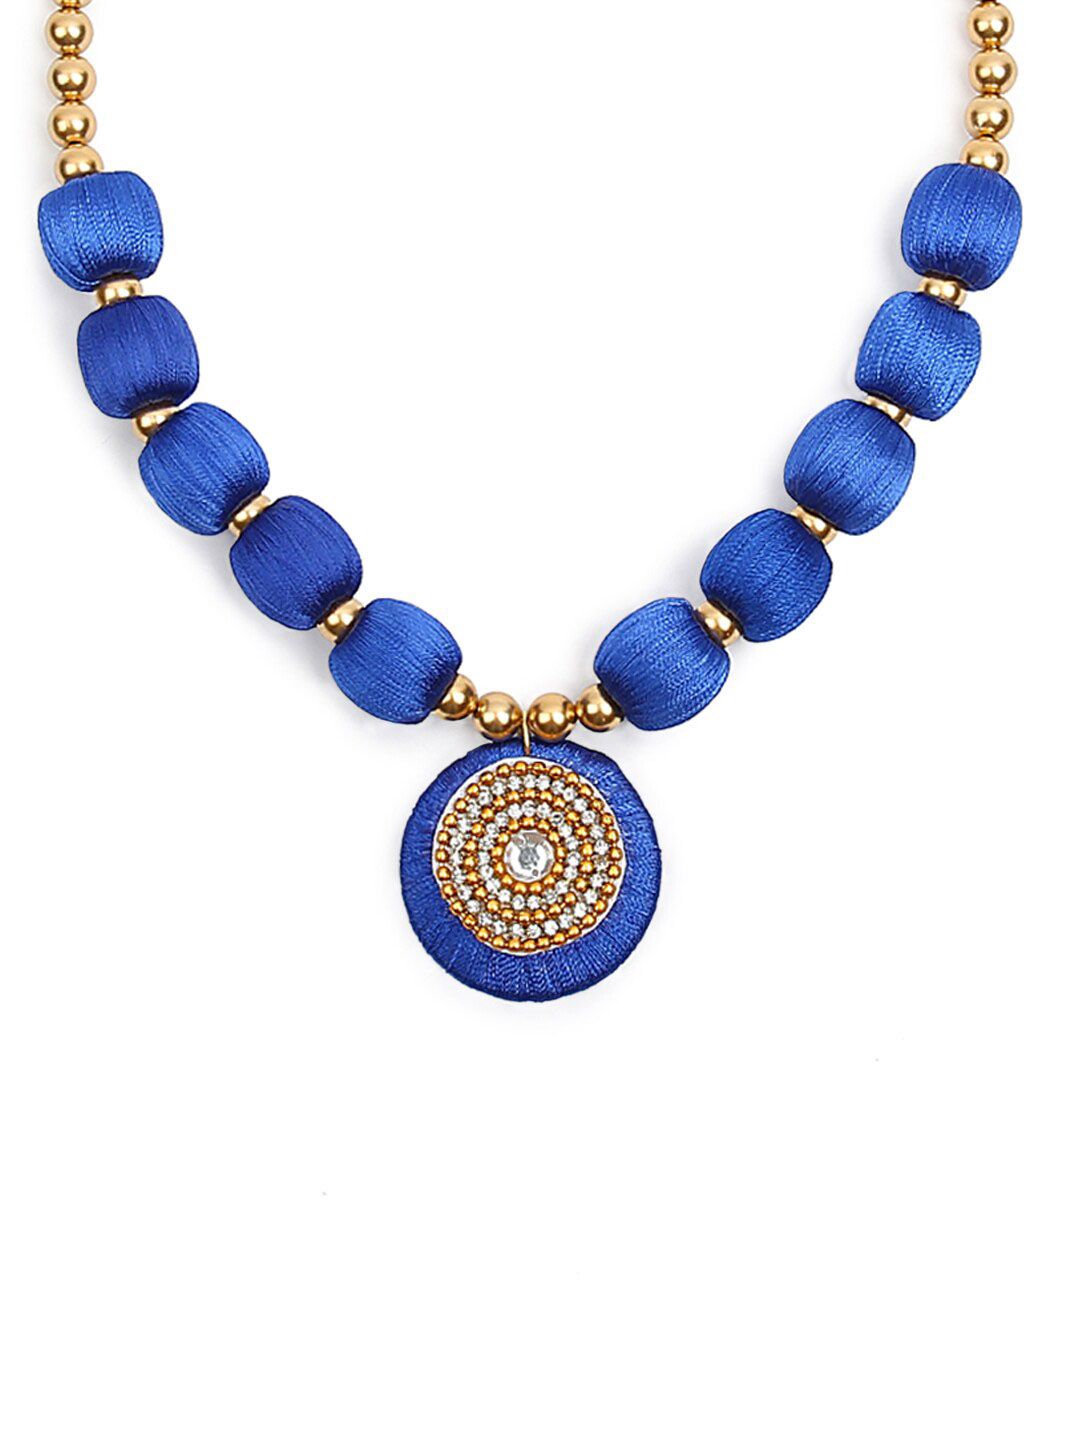 AKSHARA Gold-Toned & Blue Beaded Handcrafted Necklace Price in India